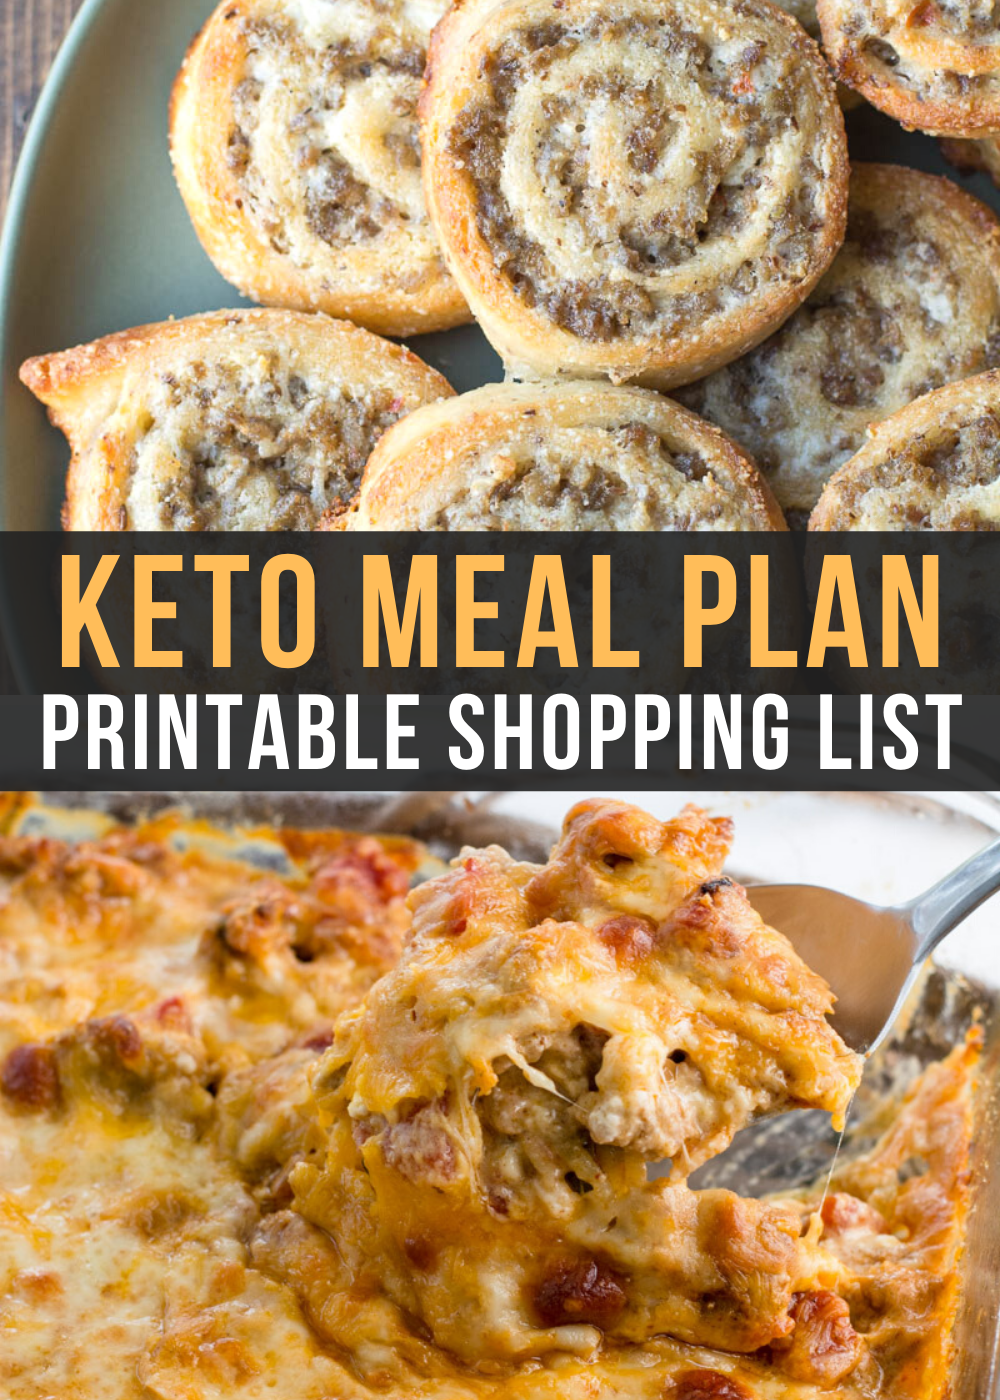 Ready to try keto? I've made it easy with this Easy Keto Meal Plan which includes 5 EASY low carb dinners plus a keto dessert recipe complete with net carb counts and a printable shopping list.